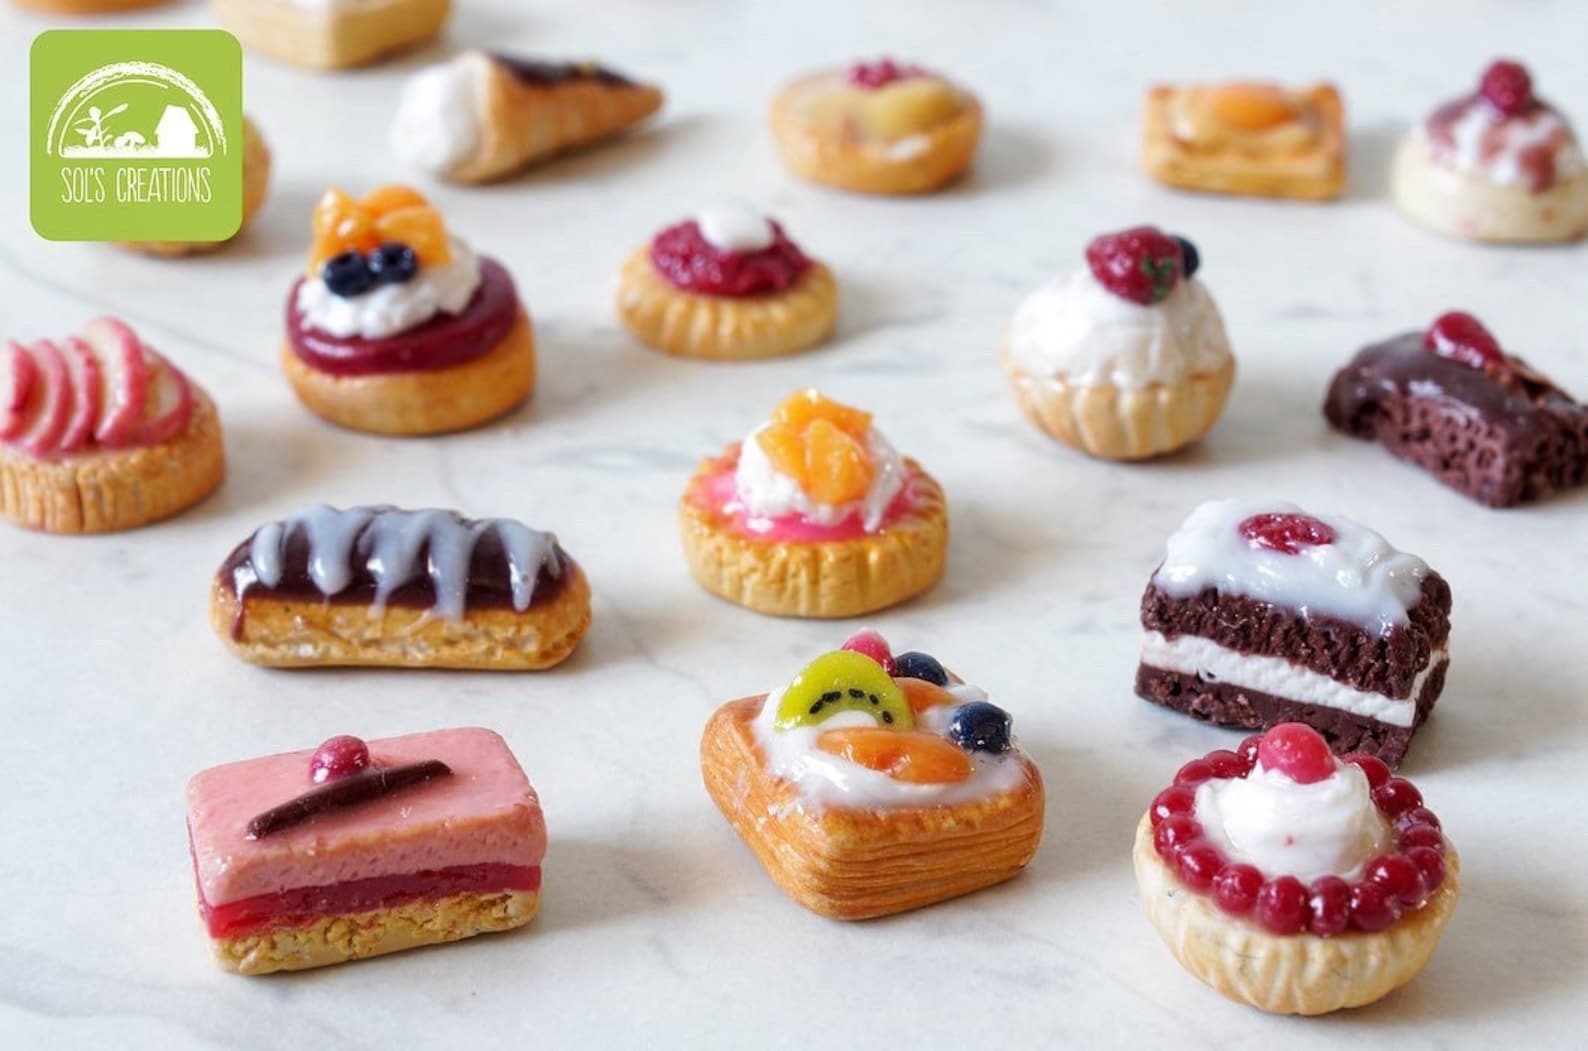 Assorted Mixed Miniature Pastries Scale 1:12 - Etsy